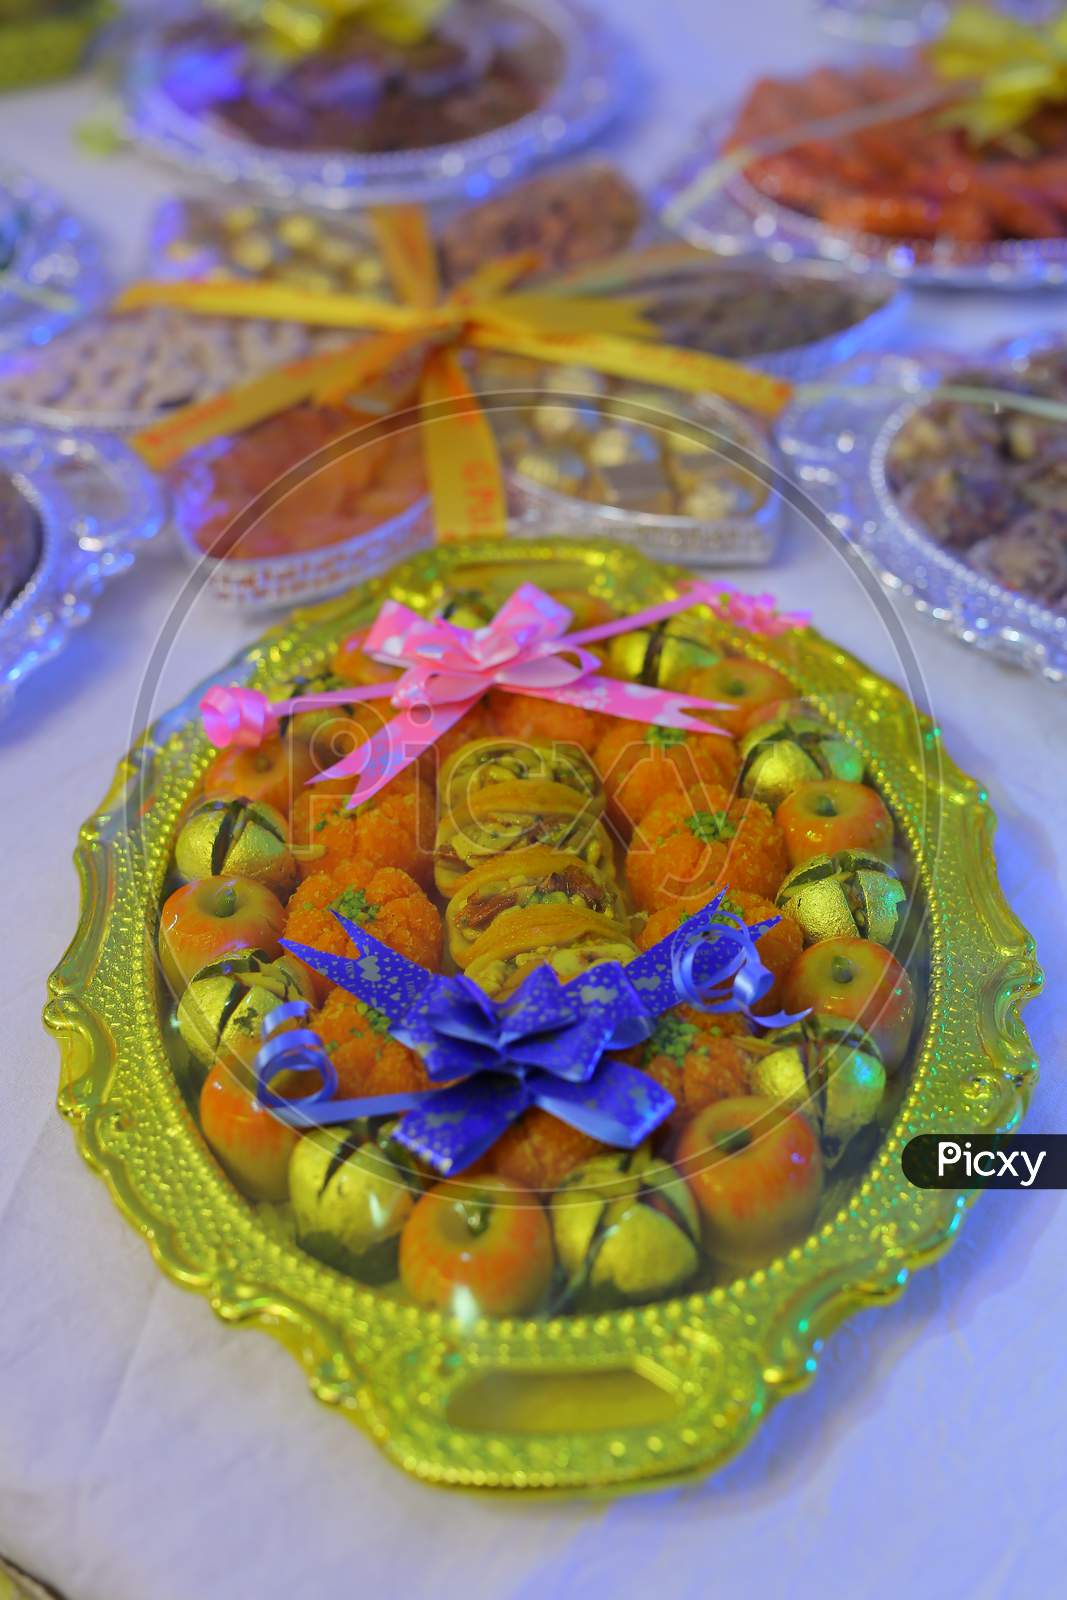 Fruits and sweets served in packages during Engagement ceremony